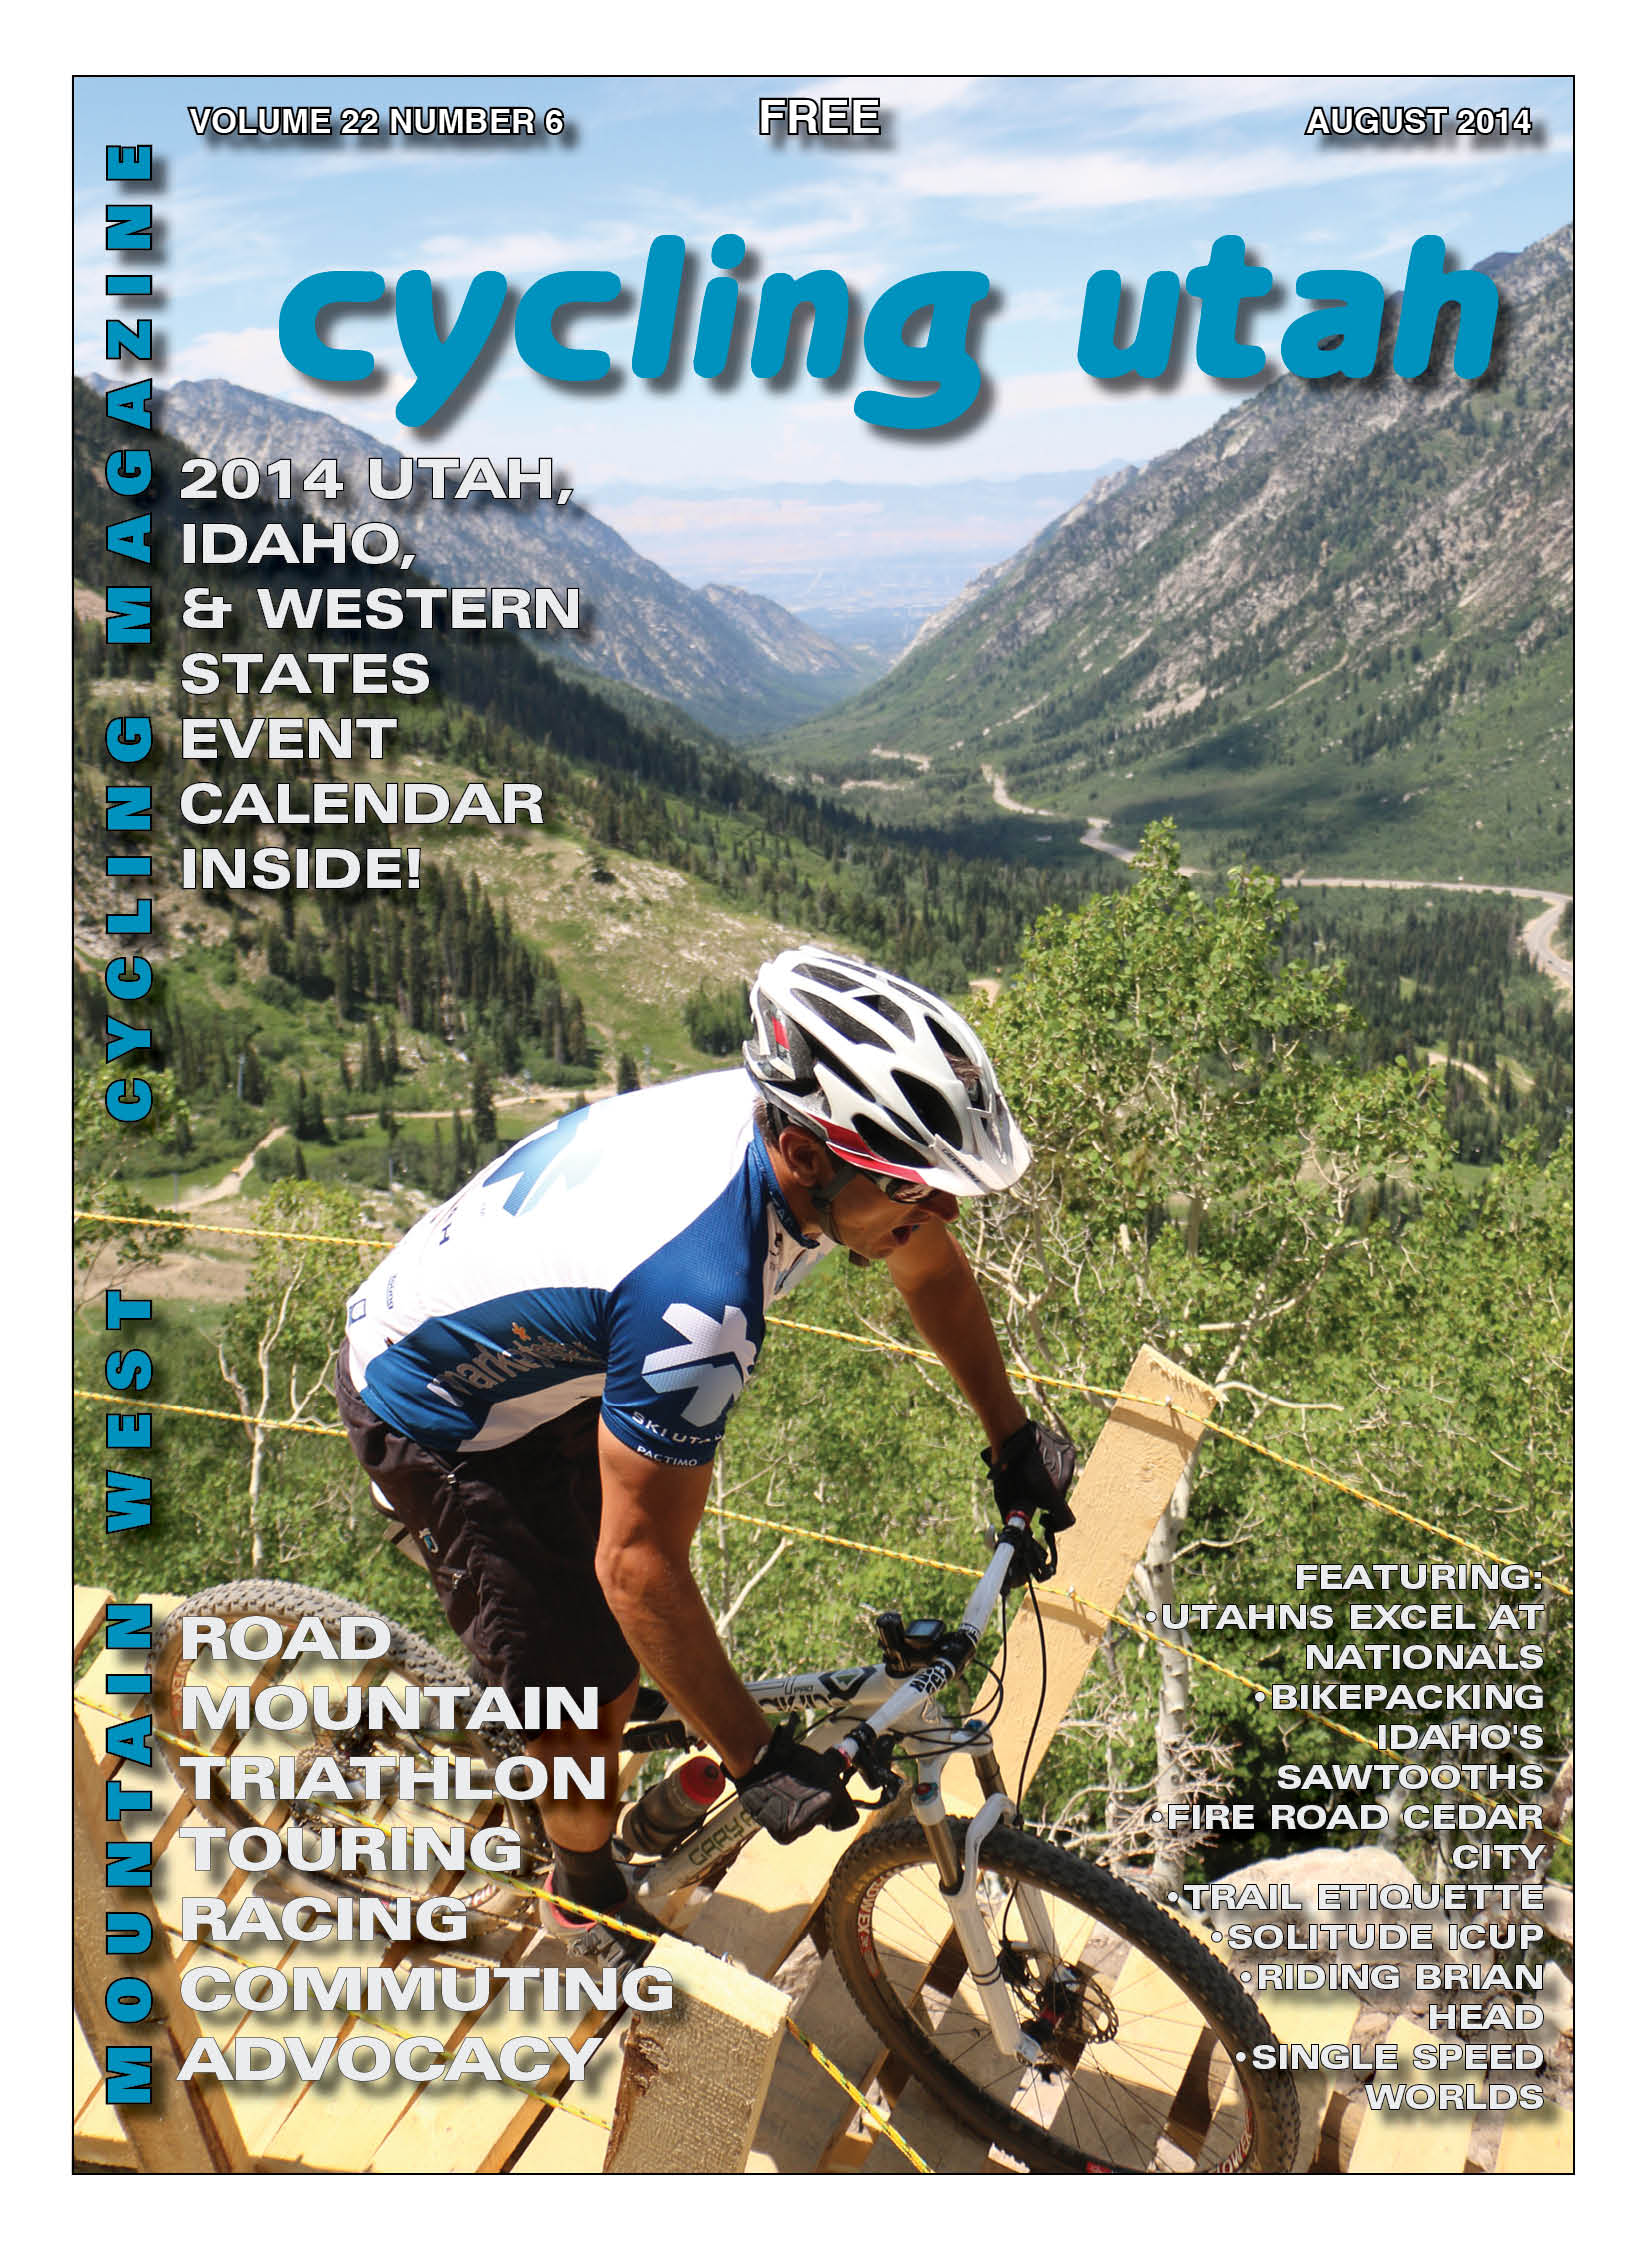 Cycling Utah’s August 2014 Issue is Now Available!